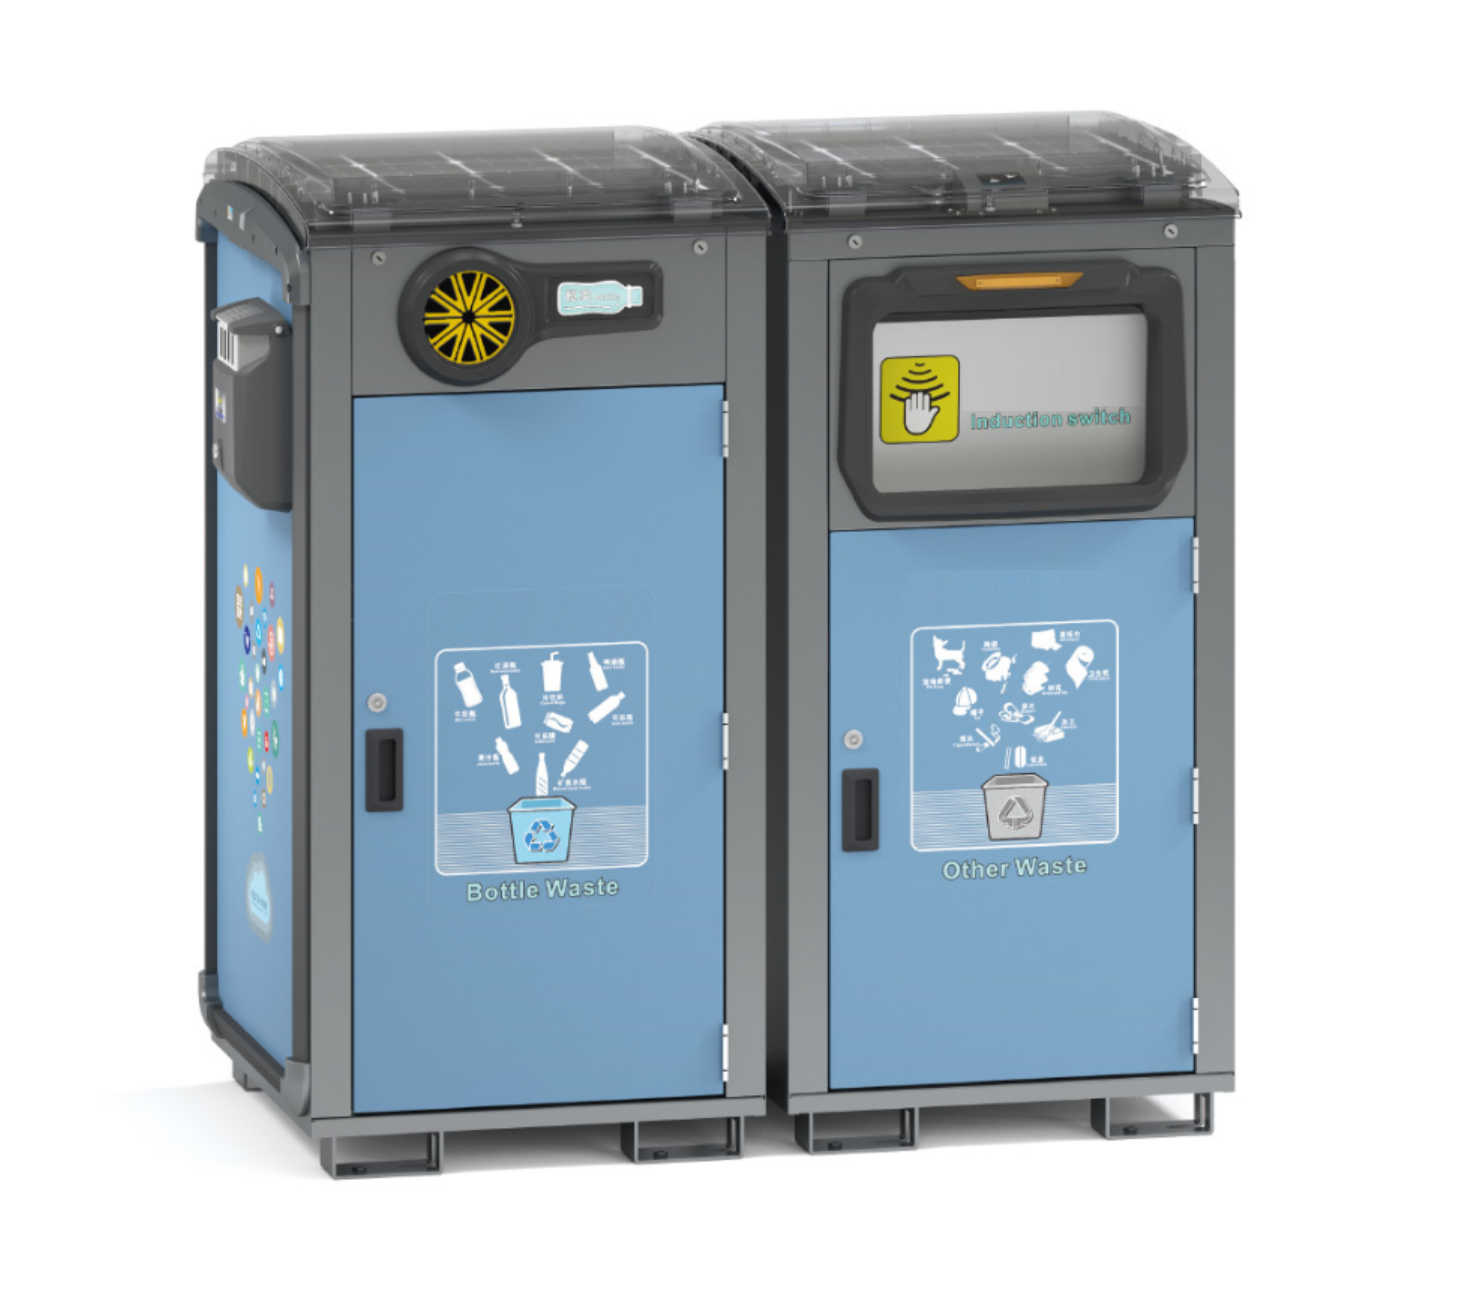 The solar compactor with bottle waste and other garbage